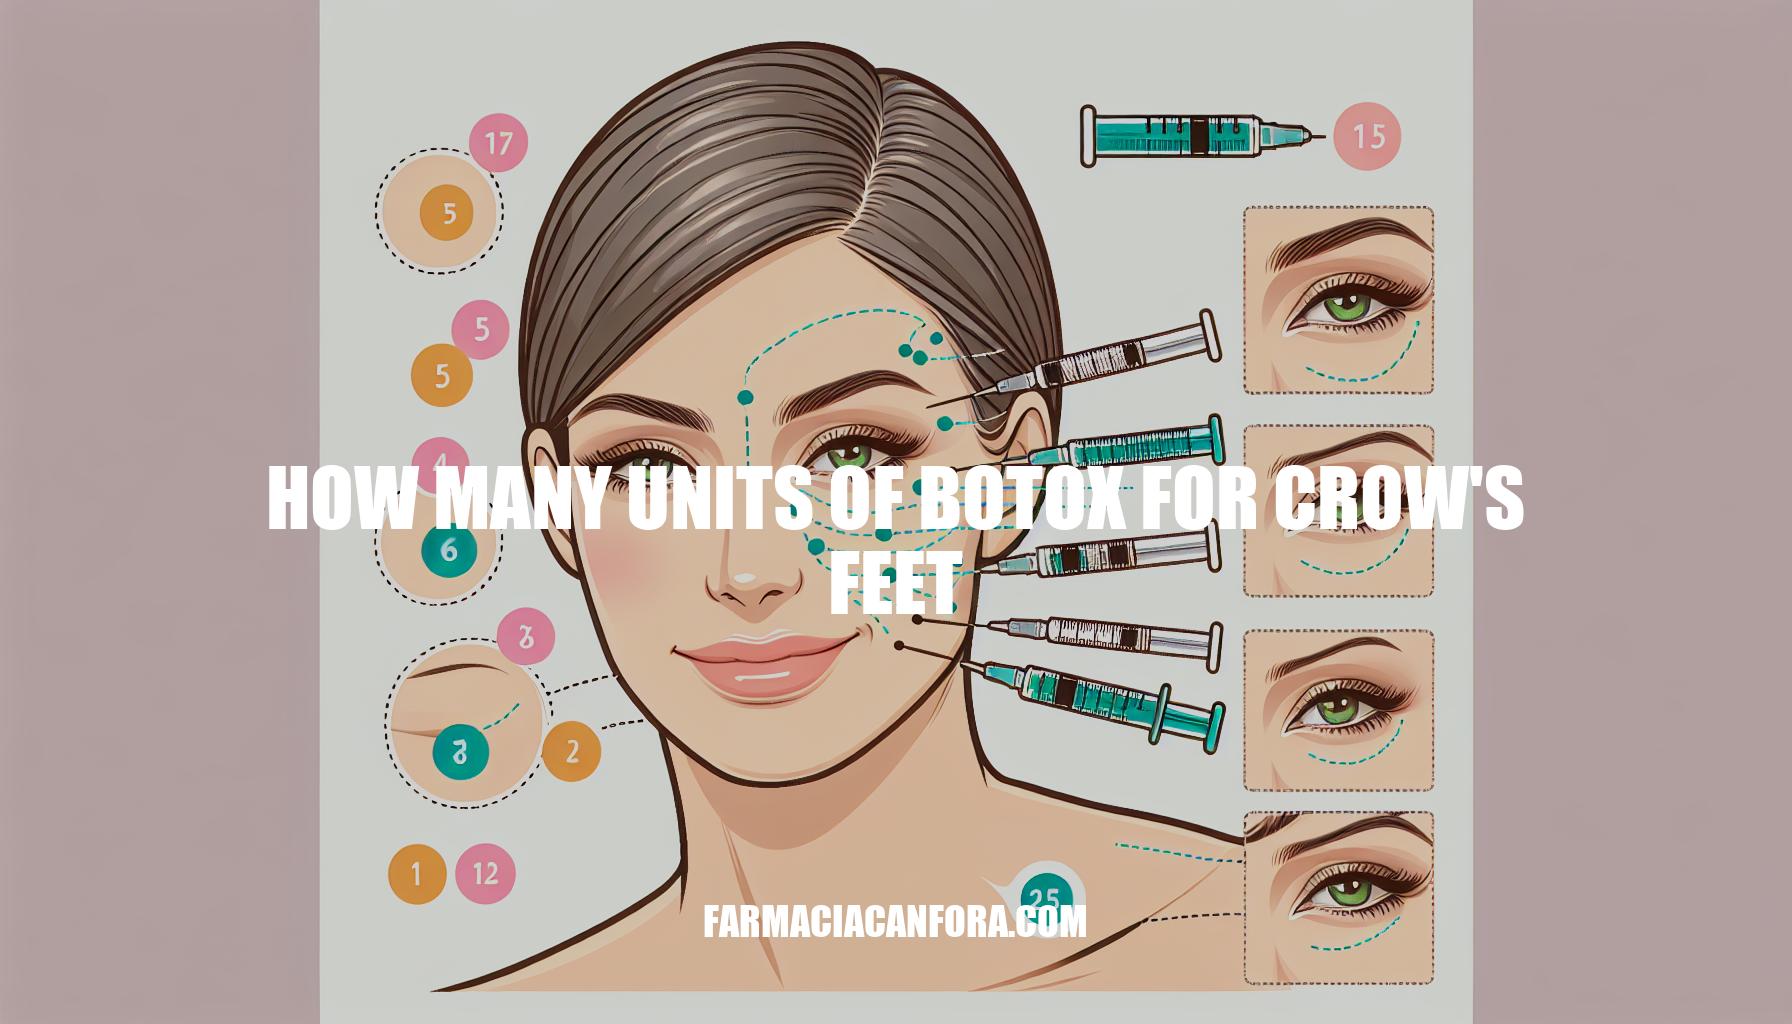 How Many Units of Botox for Crow's Feet